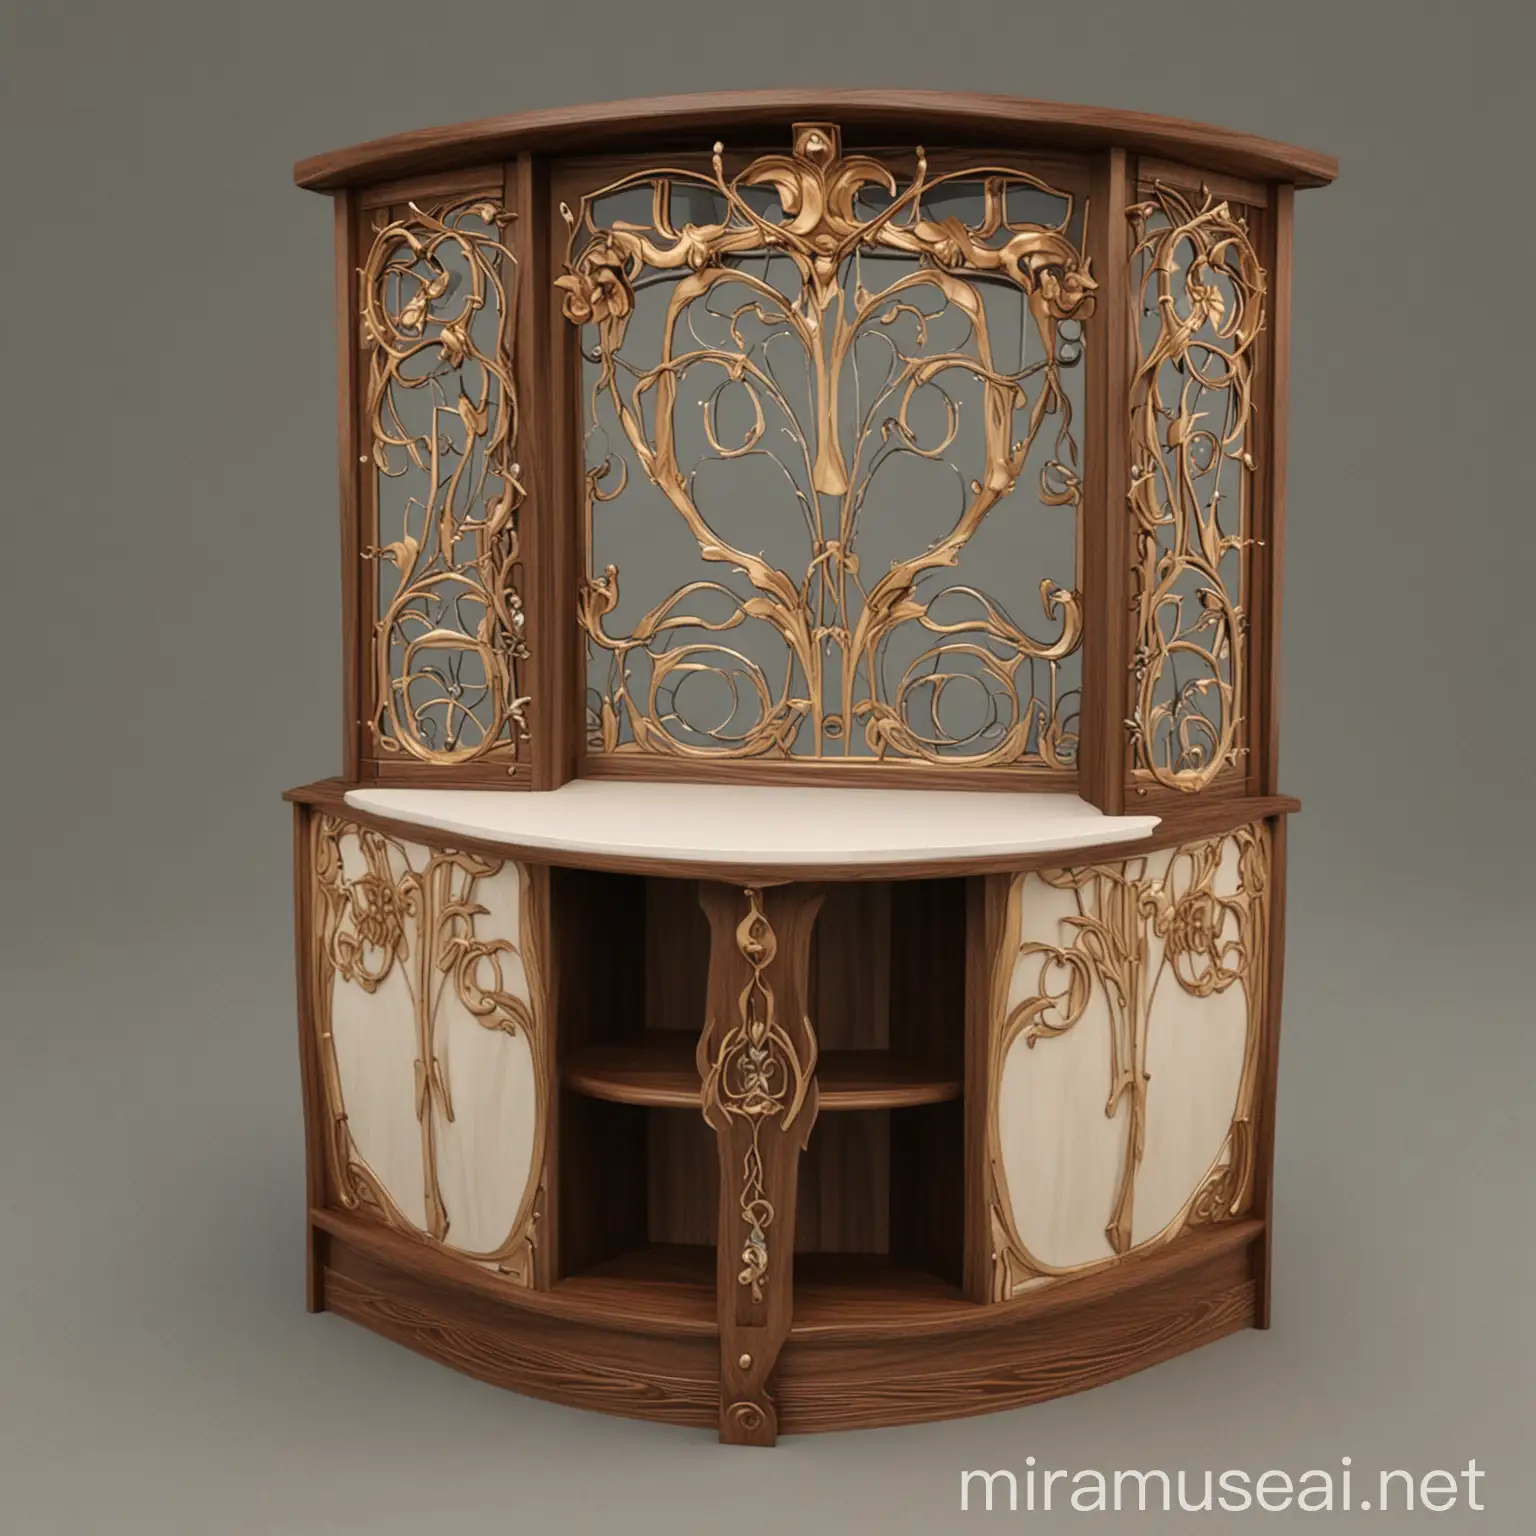 Design of a coffee corner unit inspired by the Art Nouveau style 